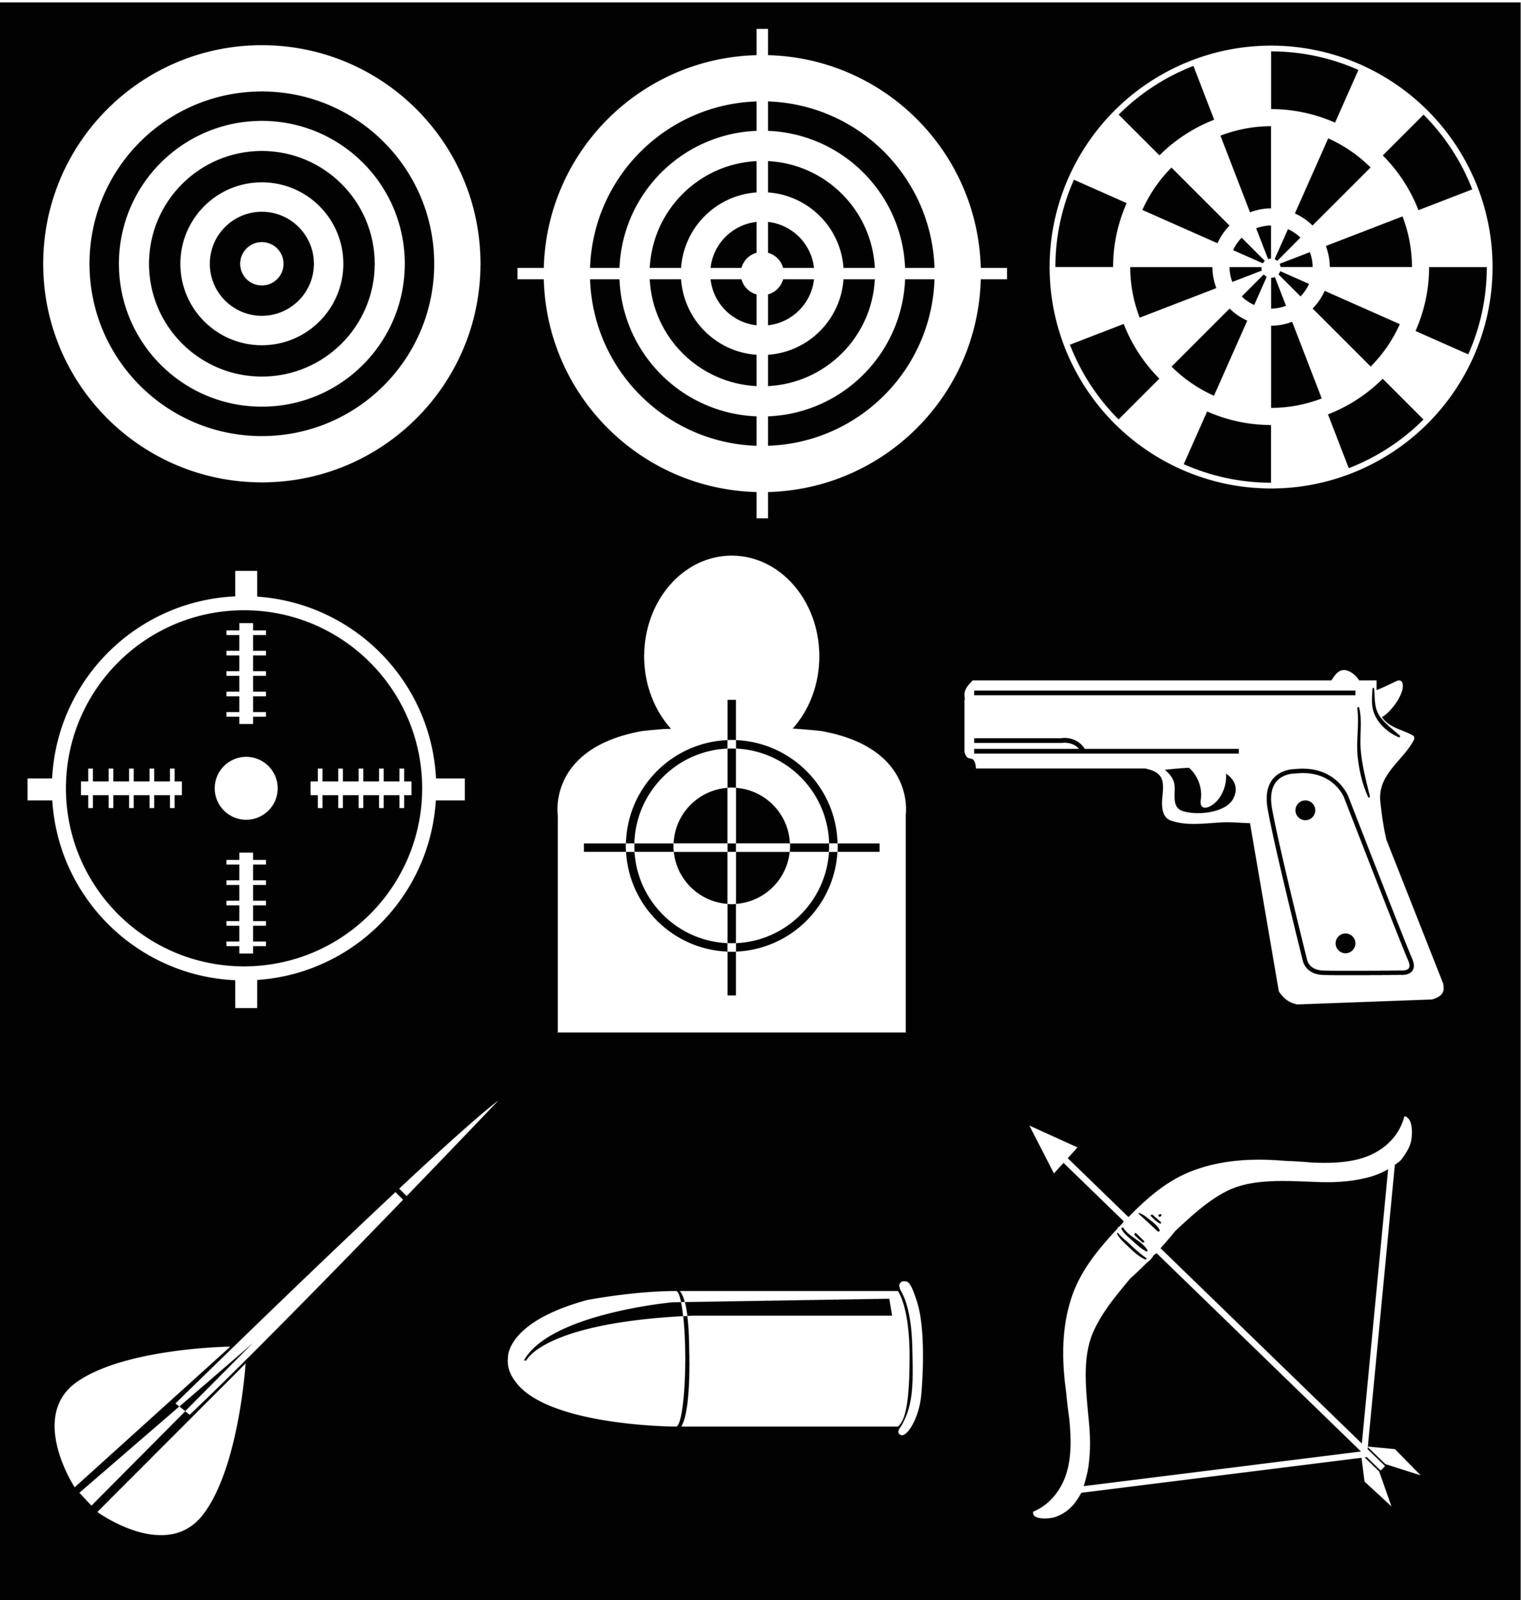 Illustration of the shooting devices on a black background